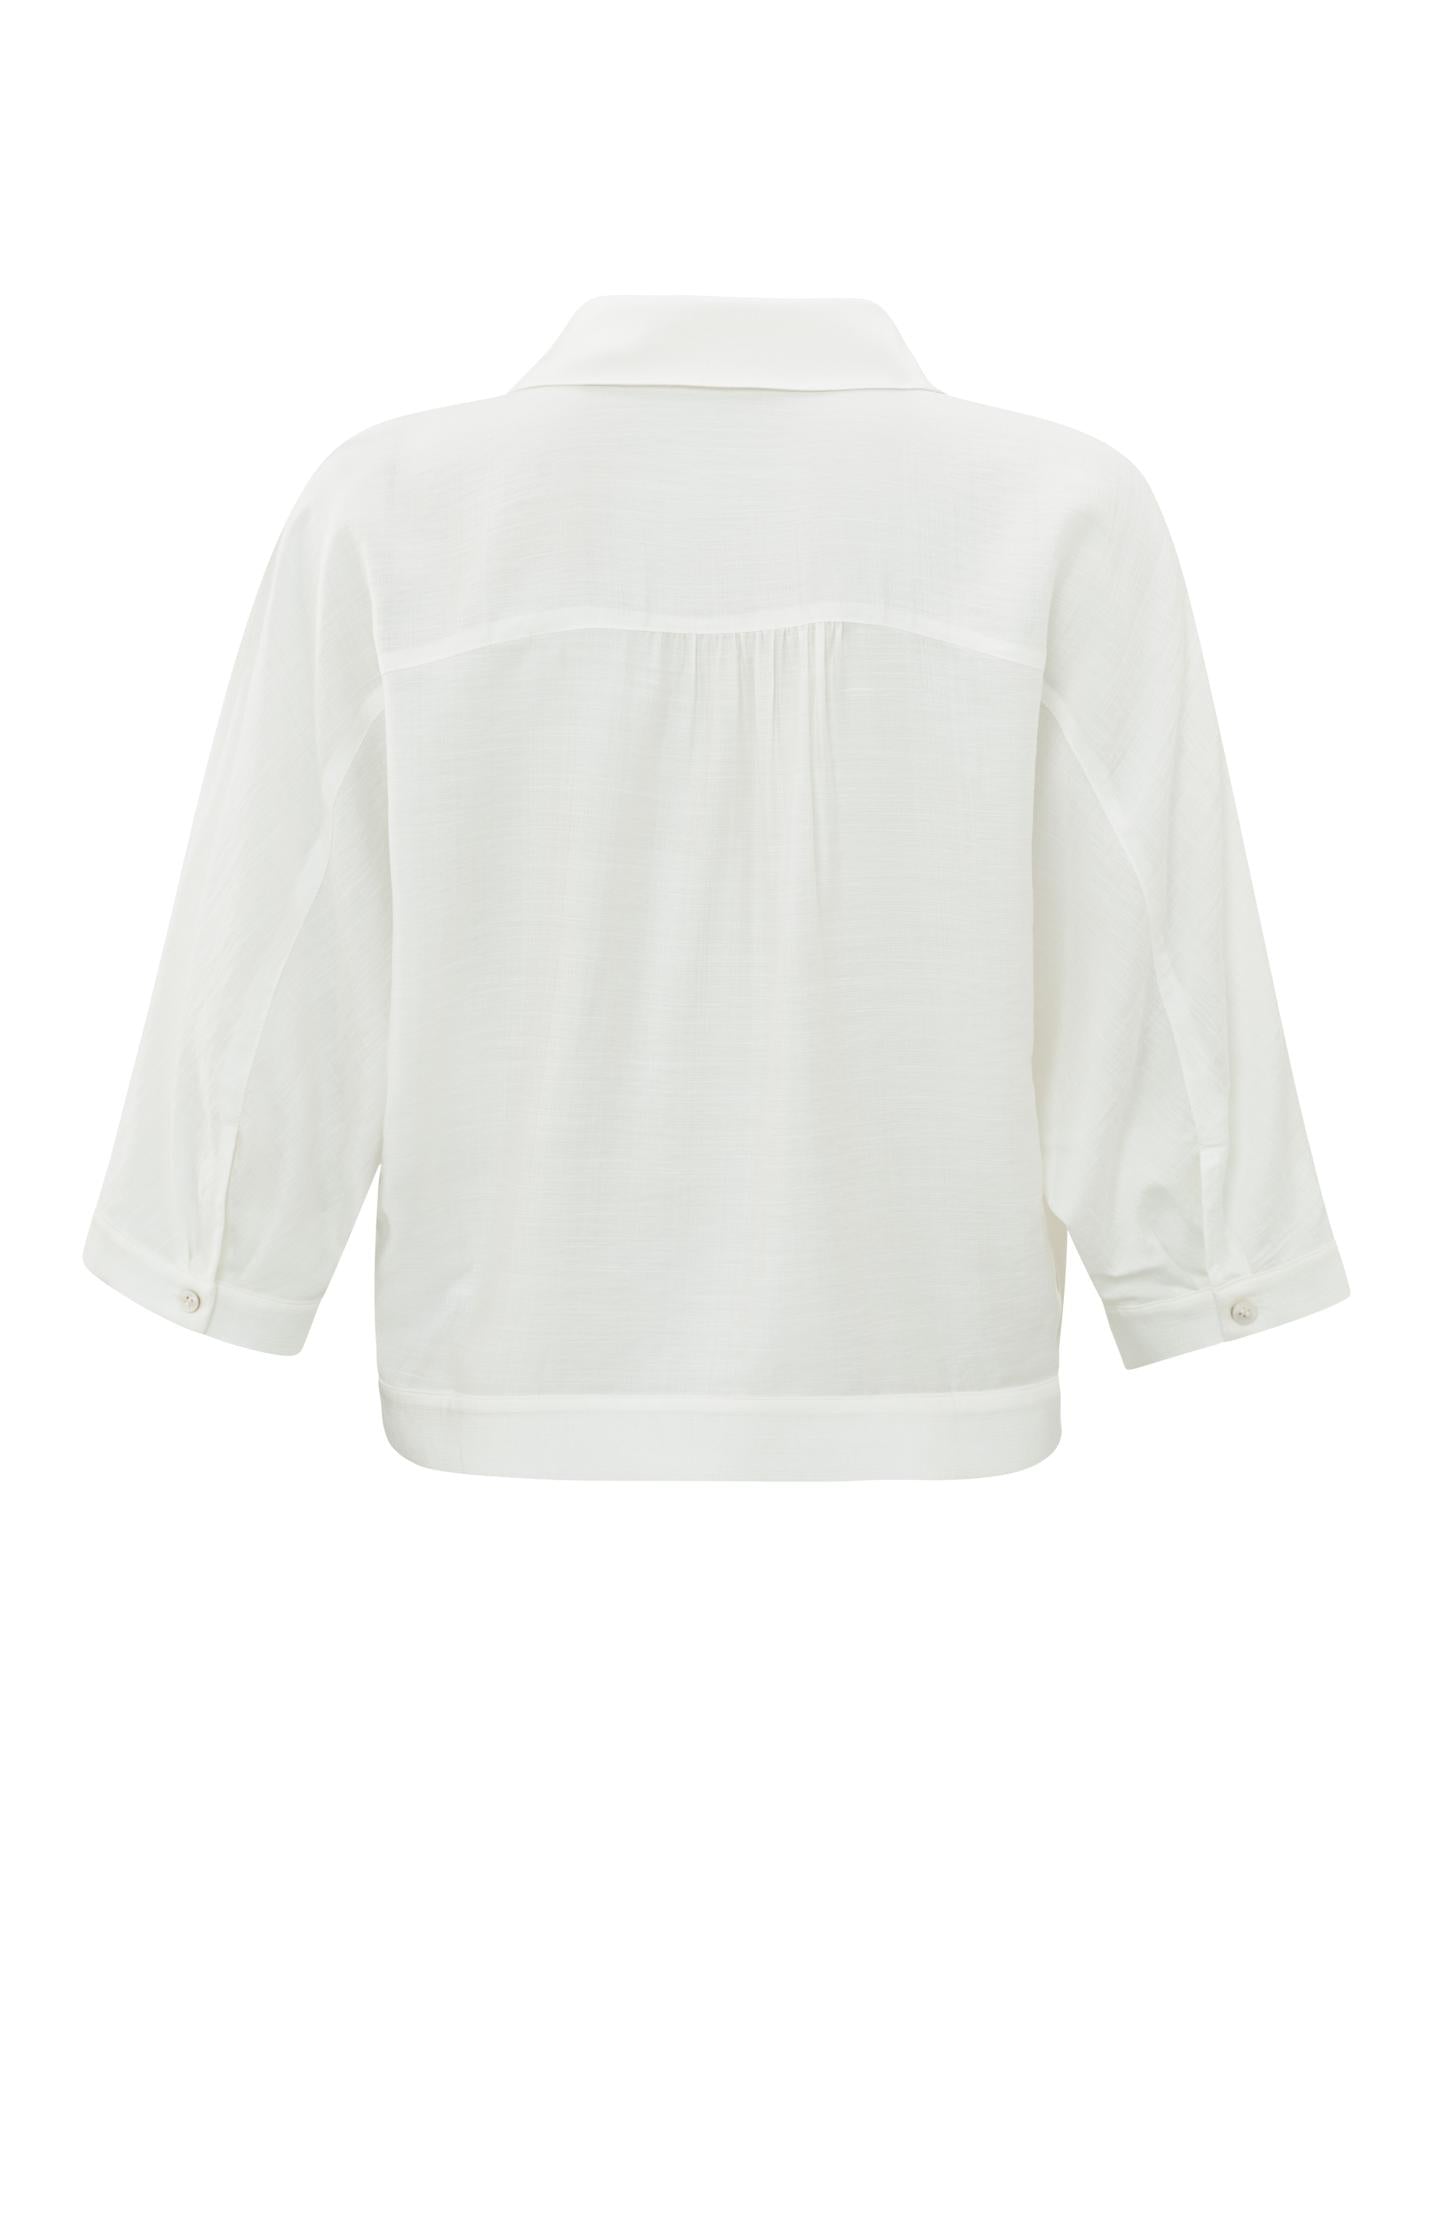 Batwing blouse with V-neck, half long sleeves and buttons